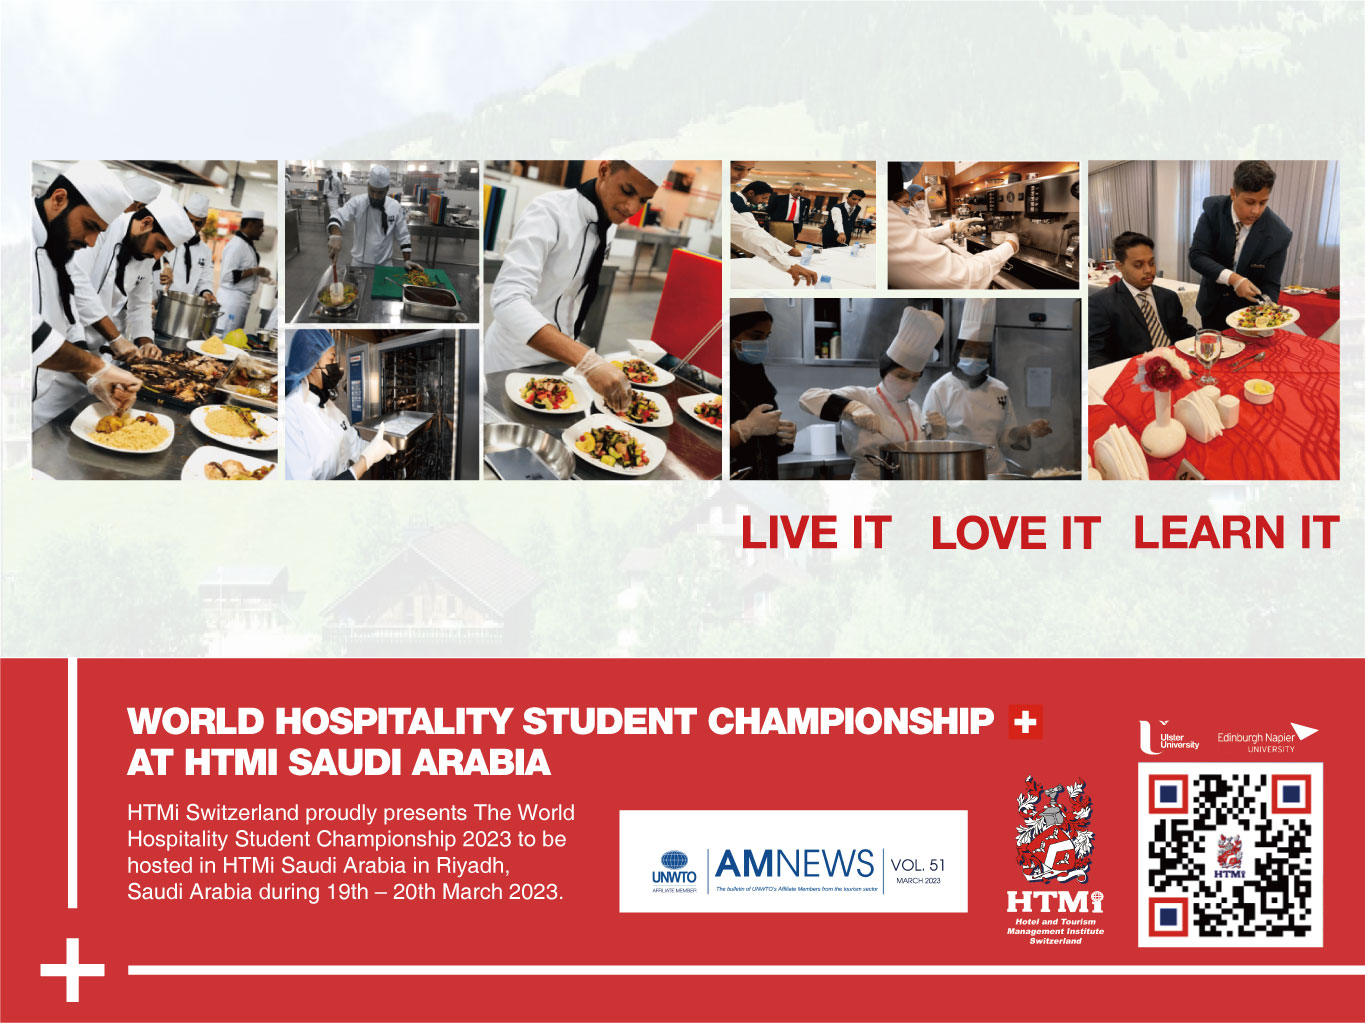 HTMi Switzerland proudly presents The World Hospitality Student Championship 2023 to be hosted in HTMi Saudi Arabia in Riyadh, Saudi Arabia during 19th - 20th March 2023.